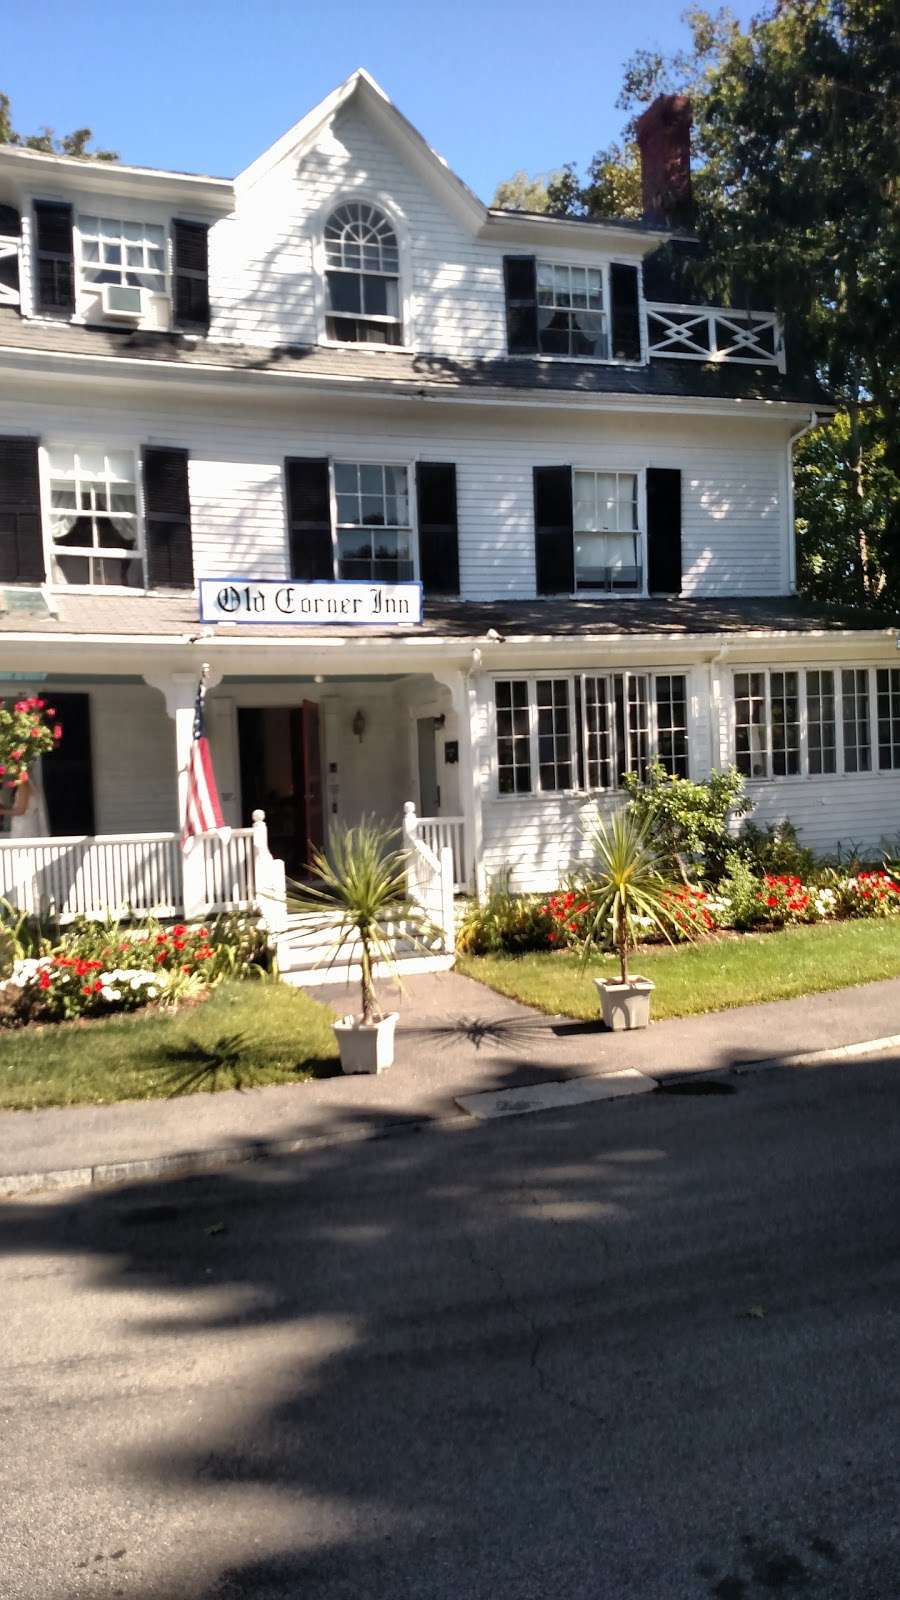 Old Corner Inn | 2 Harbor St, Manchester-by-the-Sea, MA 01944, USA | Phone: (978) 526-4996